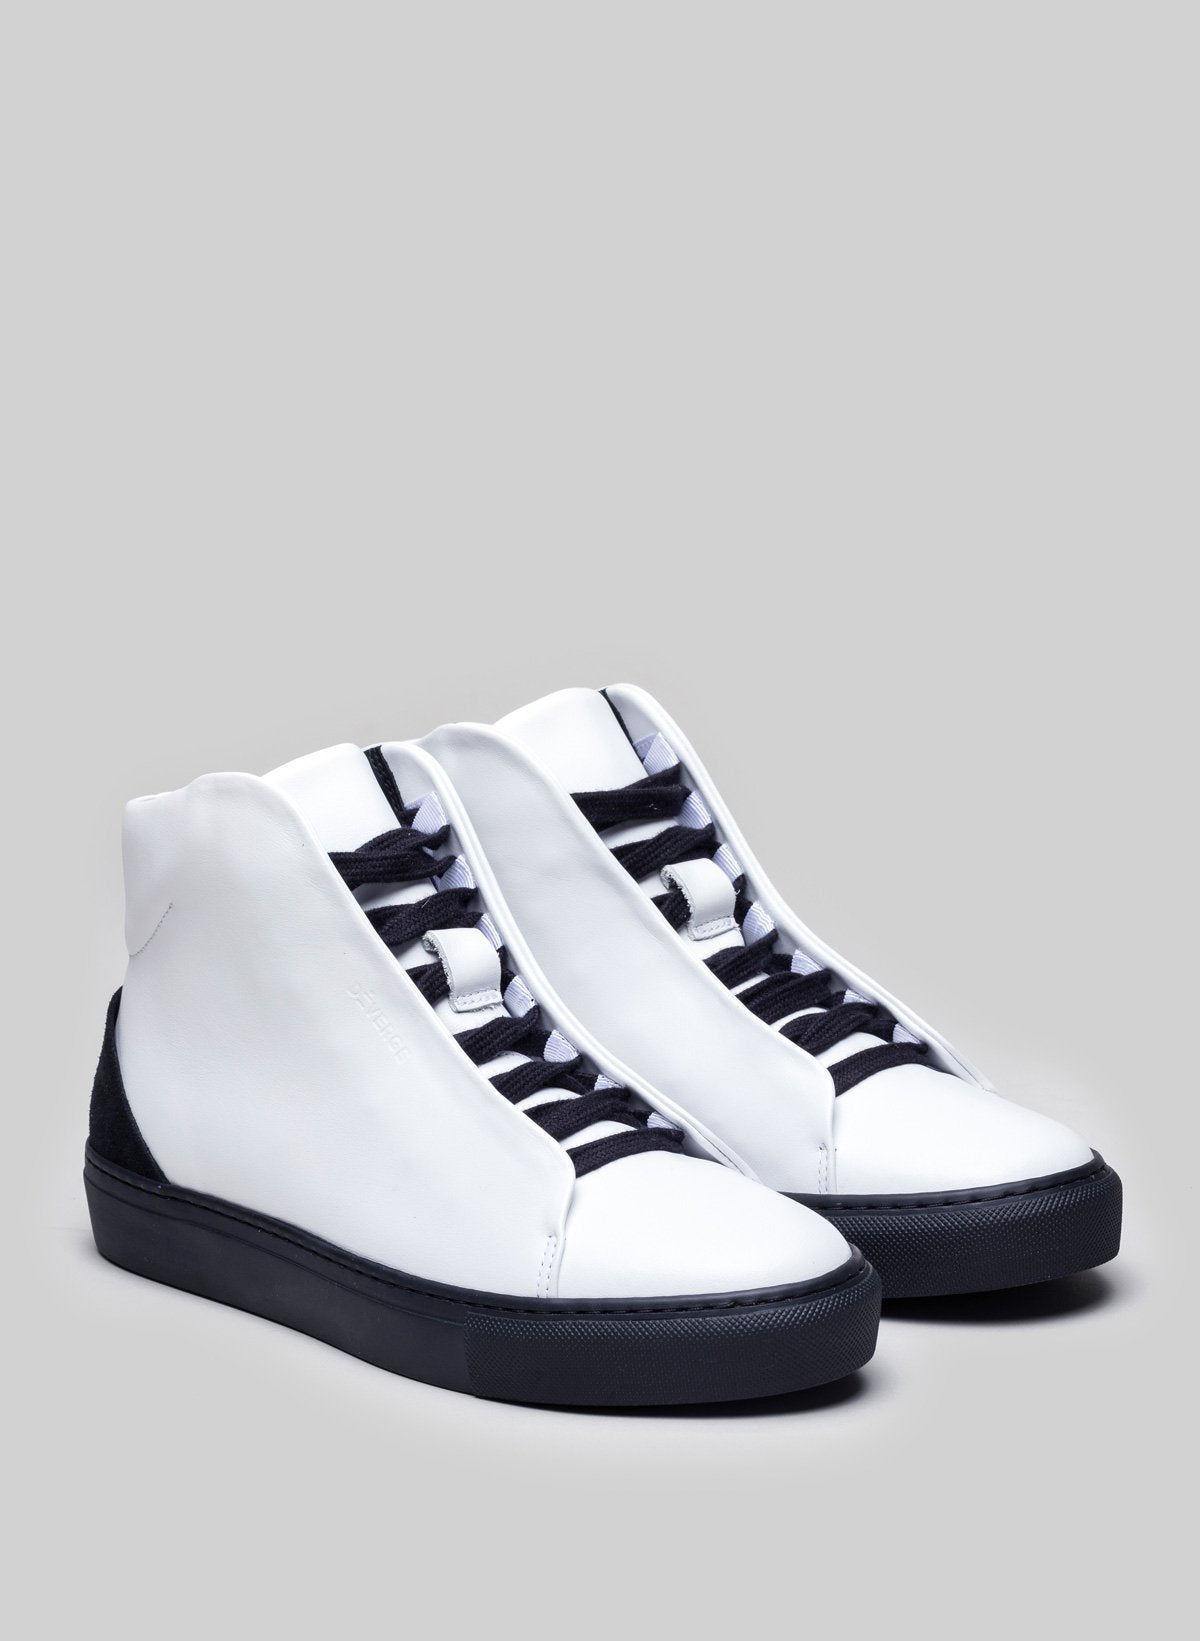 White high top sneakers with black soles and laces, custom shoes by Diverge.